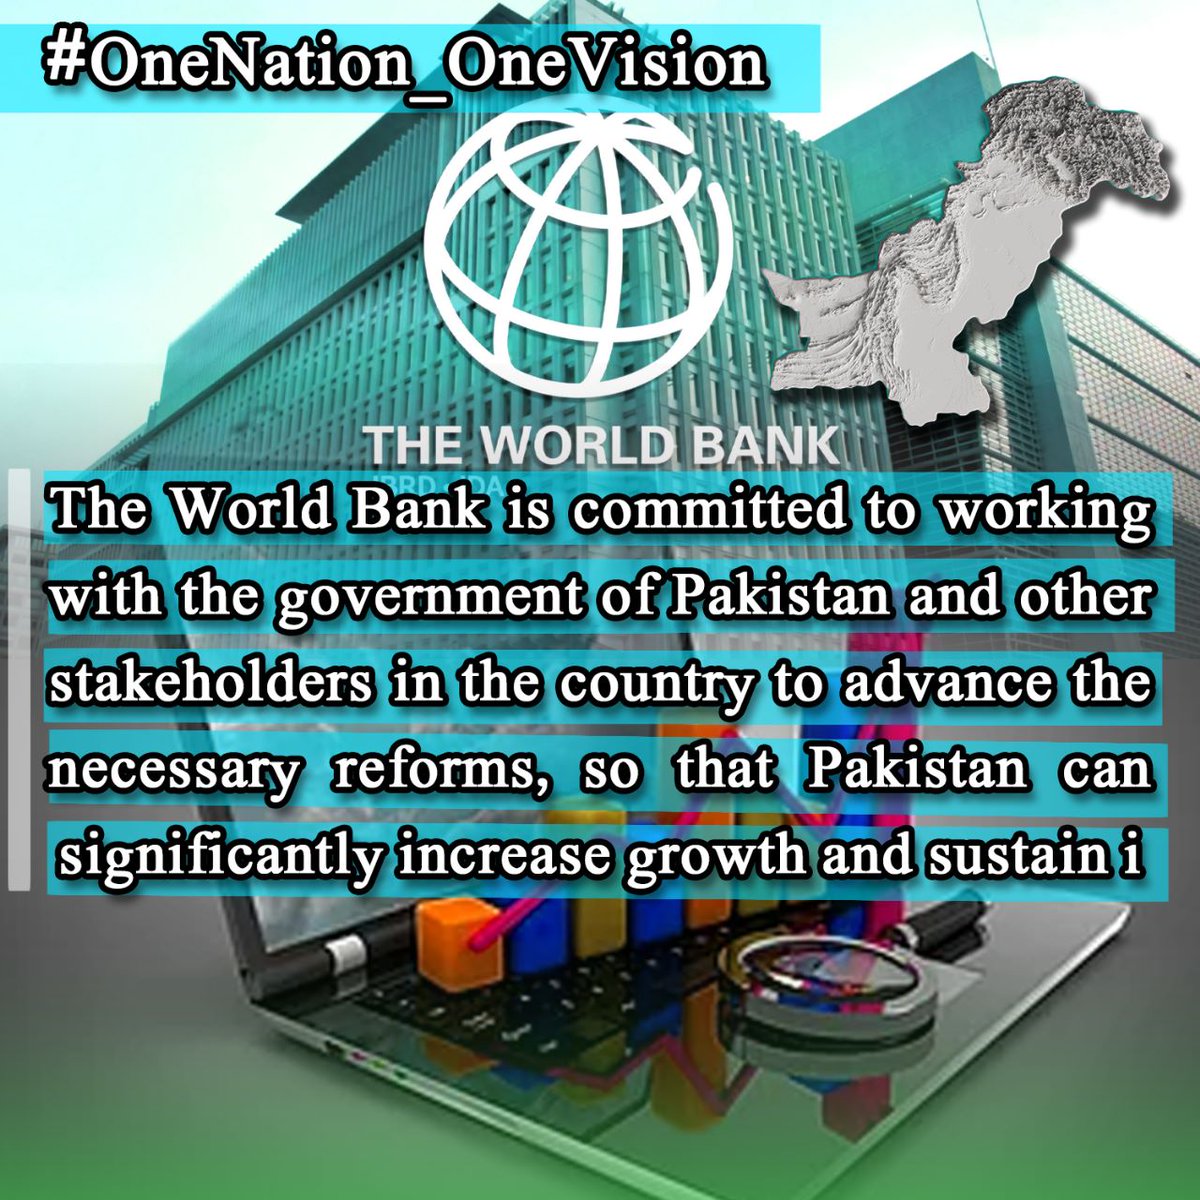 #OneNation_OneVision 
A national vision is meant to provide clarity to our shared vision of the future